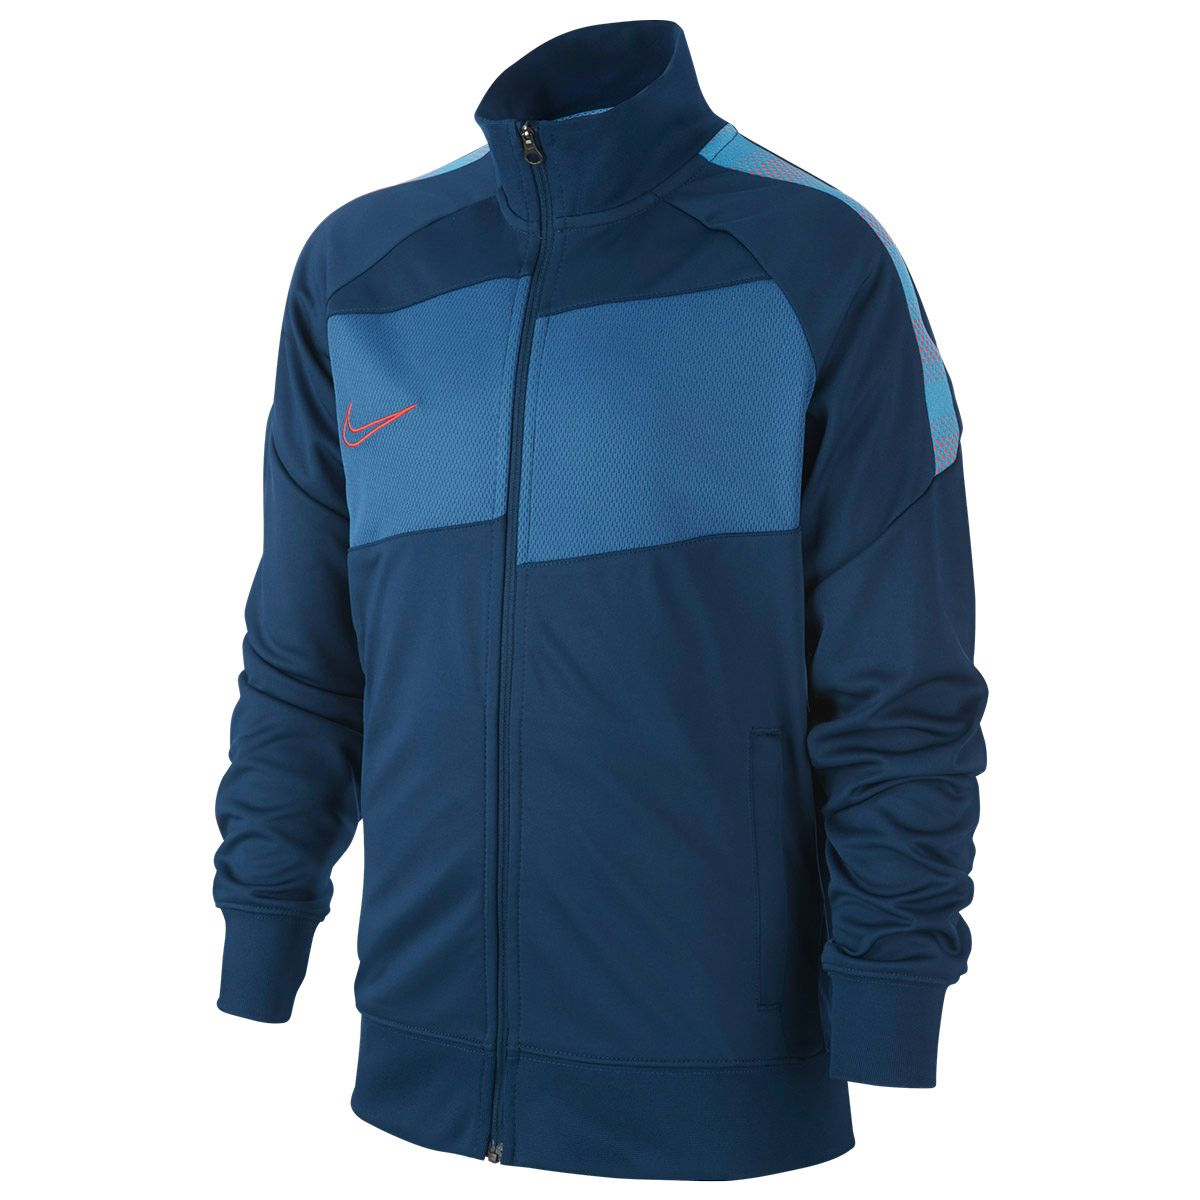 Campera Nike Dry Academy,  image number null